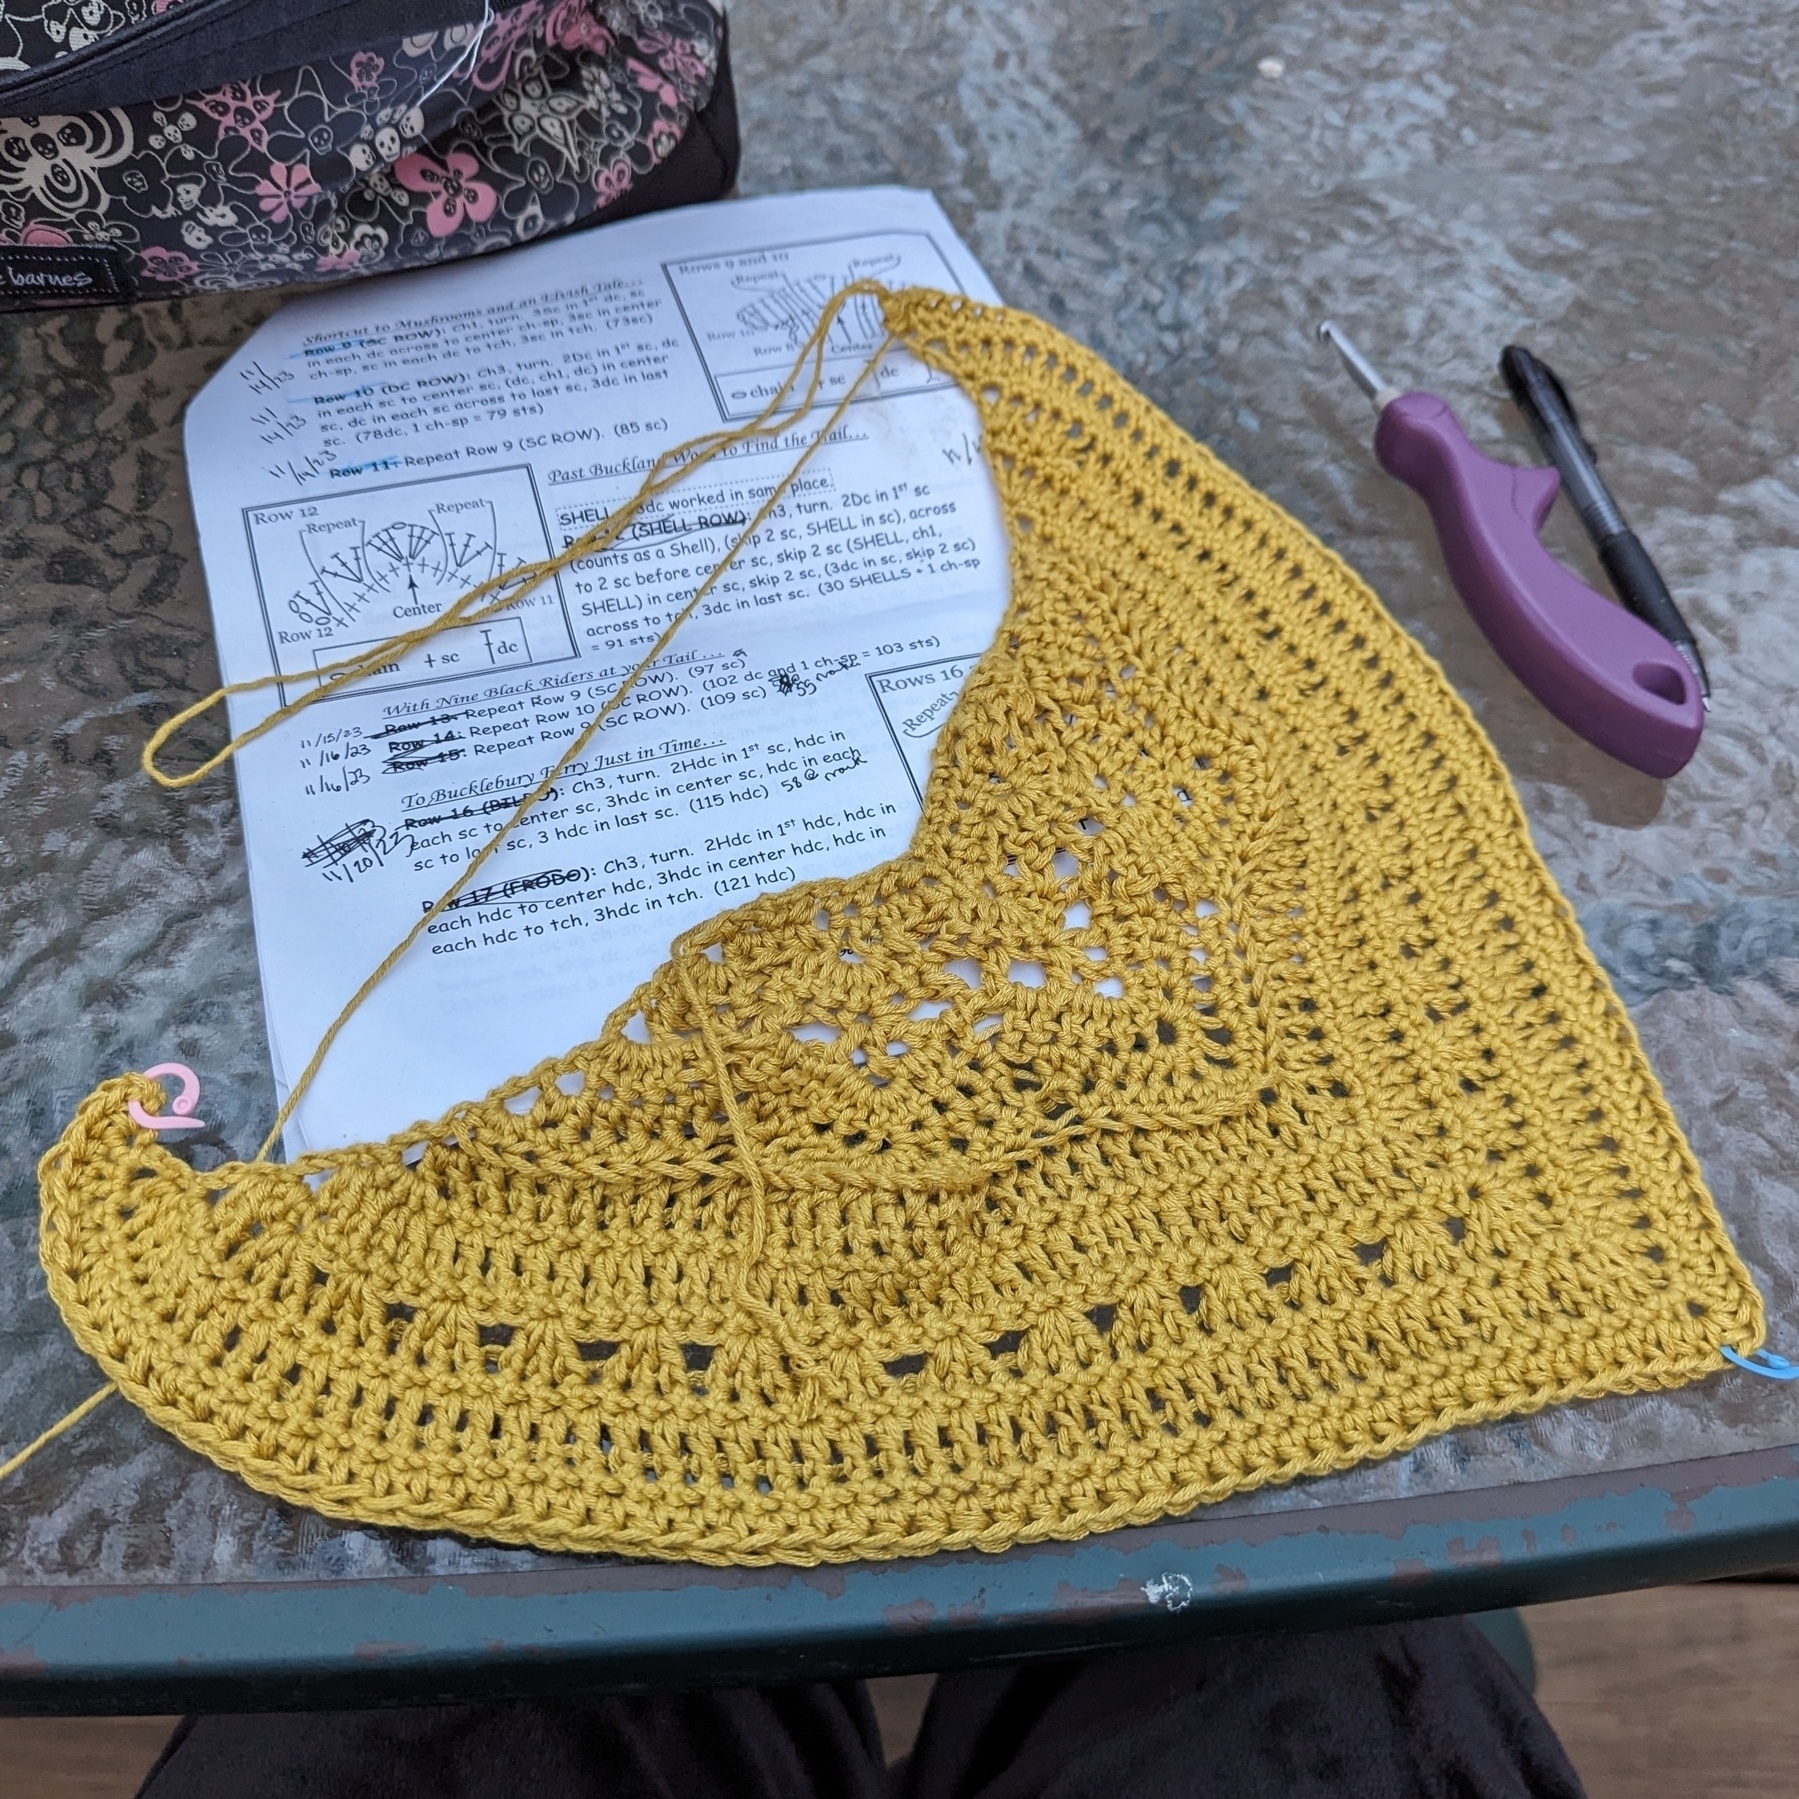 A golden-colored crocheted shawl, still in progress, sits on top of a printed pattern. To the right of it are a crochet hook and black pen.